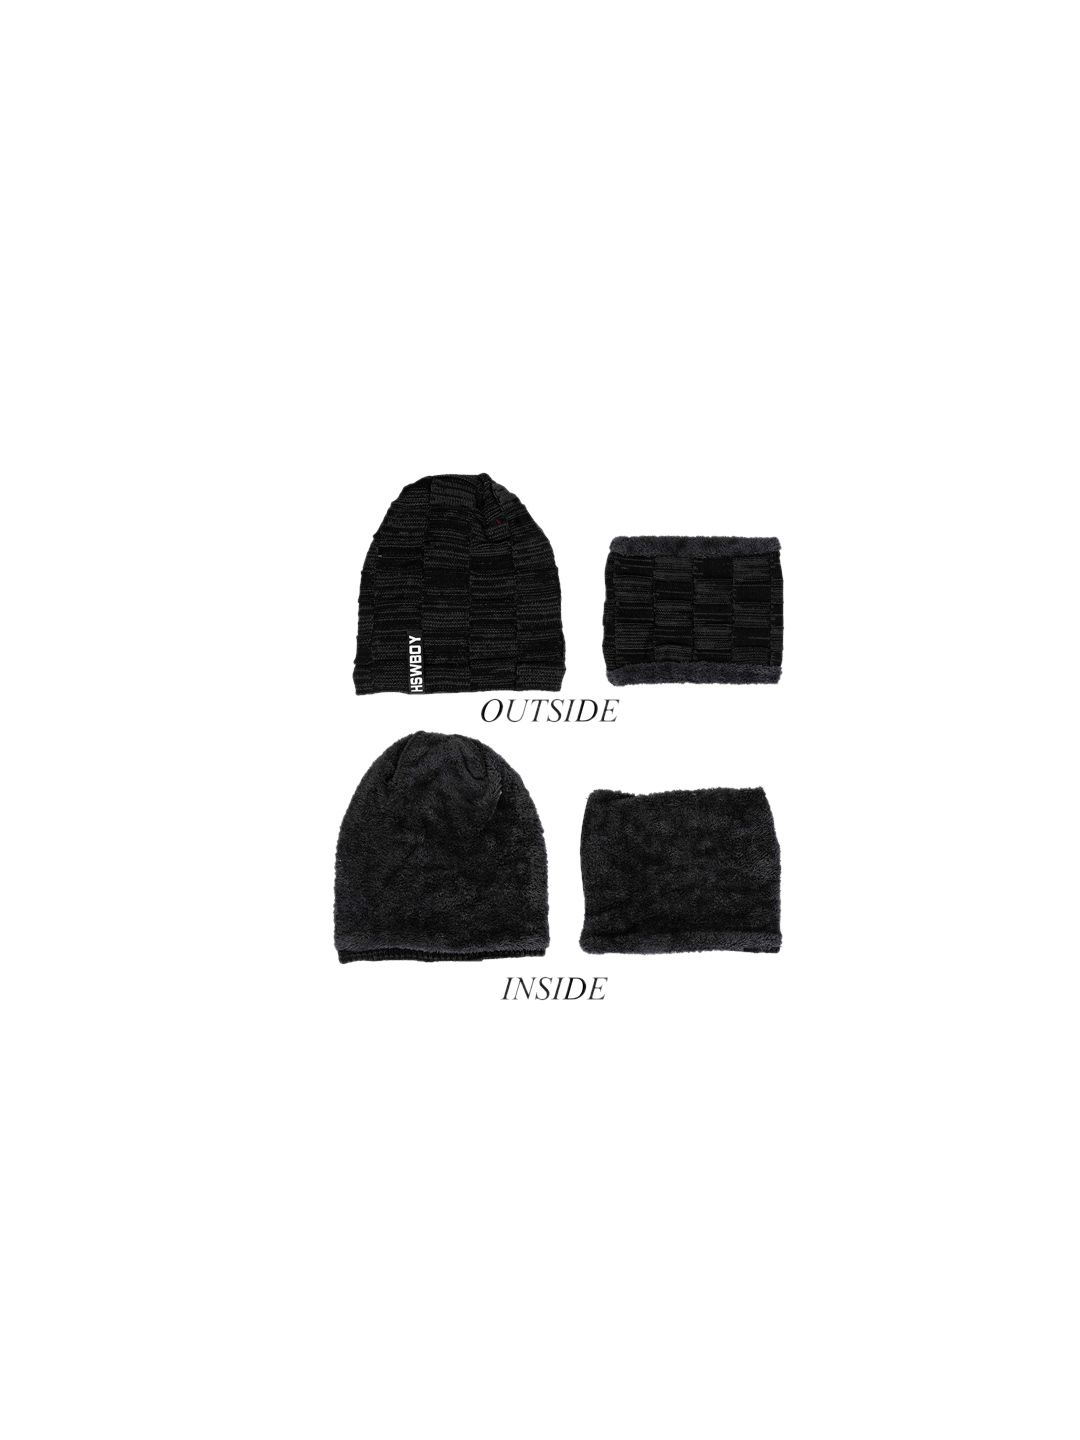 FabSeasons Unisex Black & Grey Self-Design Beanie Cap With Neck Warmer Price in India